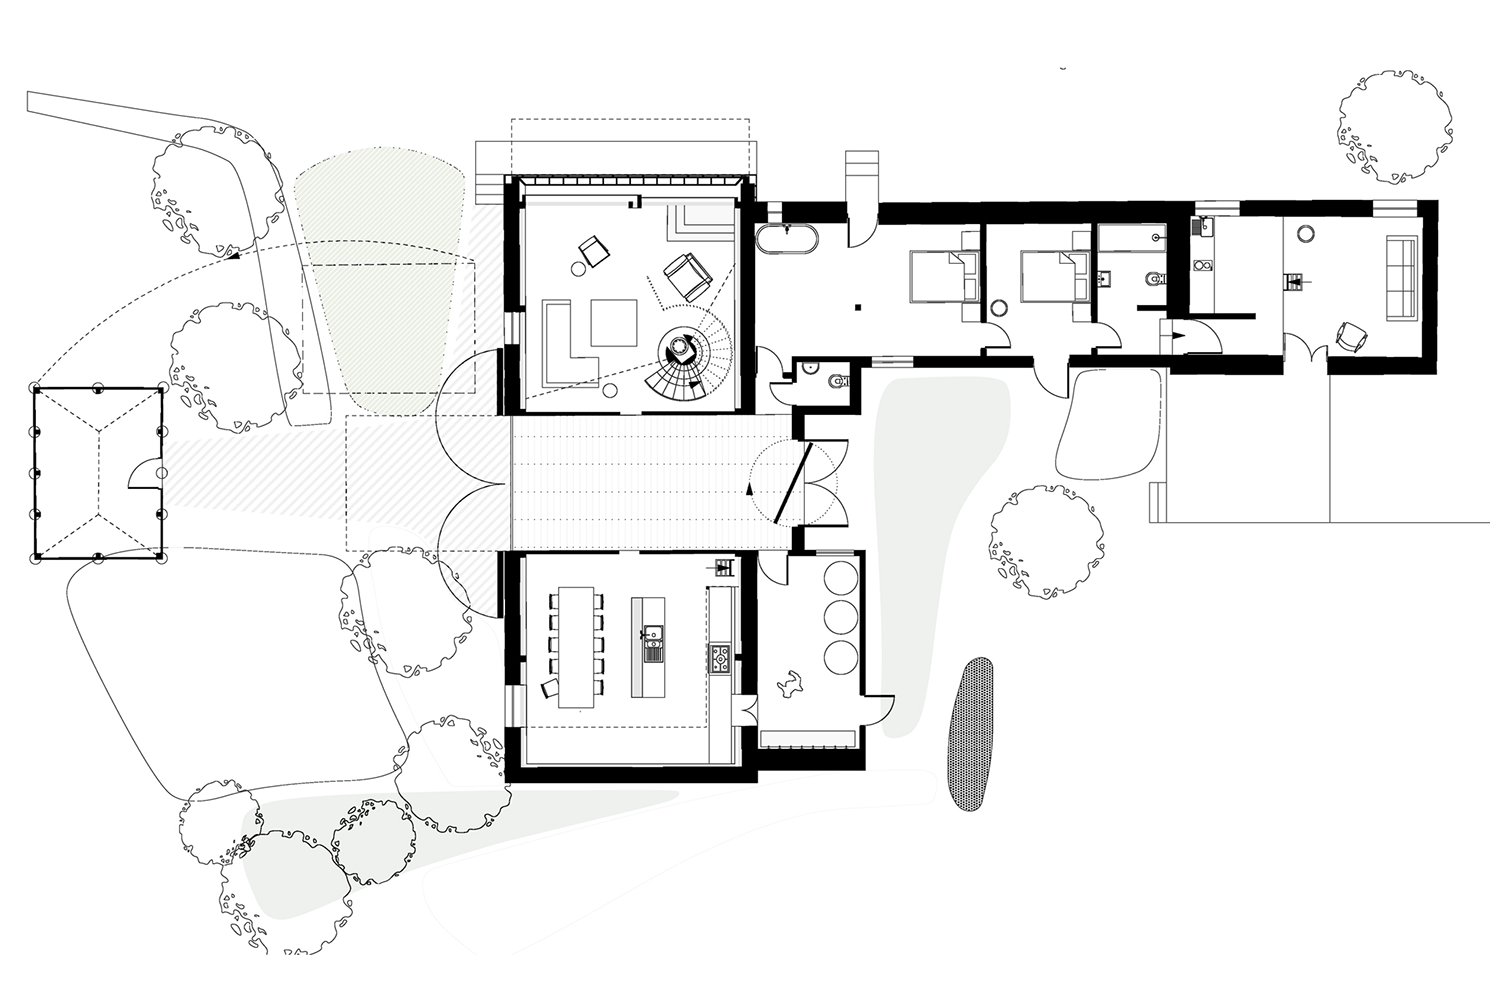 Plan of the Ancient Party Barn by Liddicoat & Goldhill in Kent, England